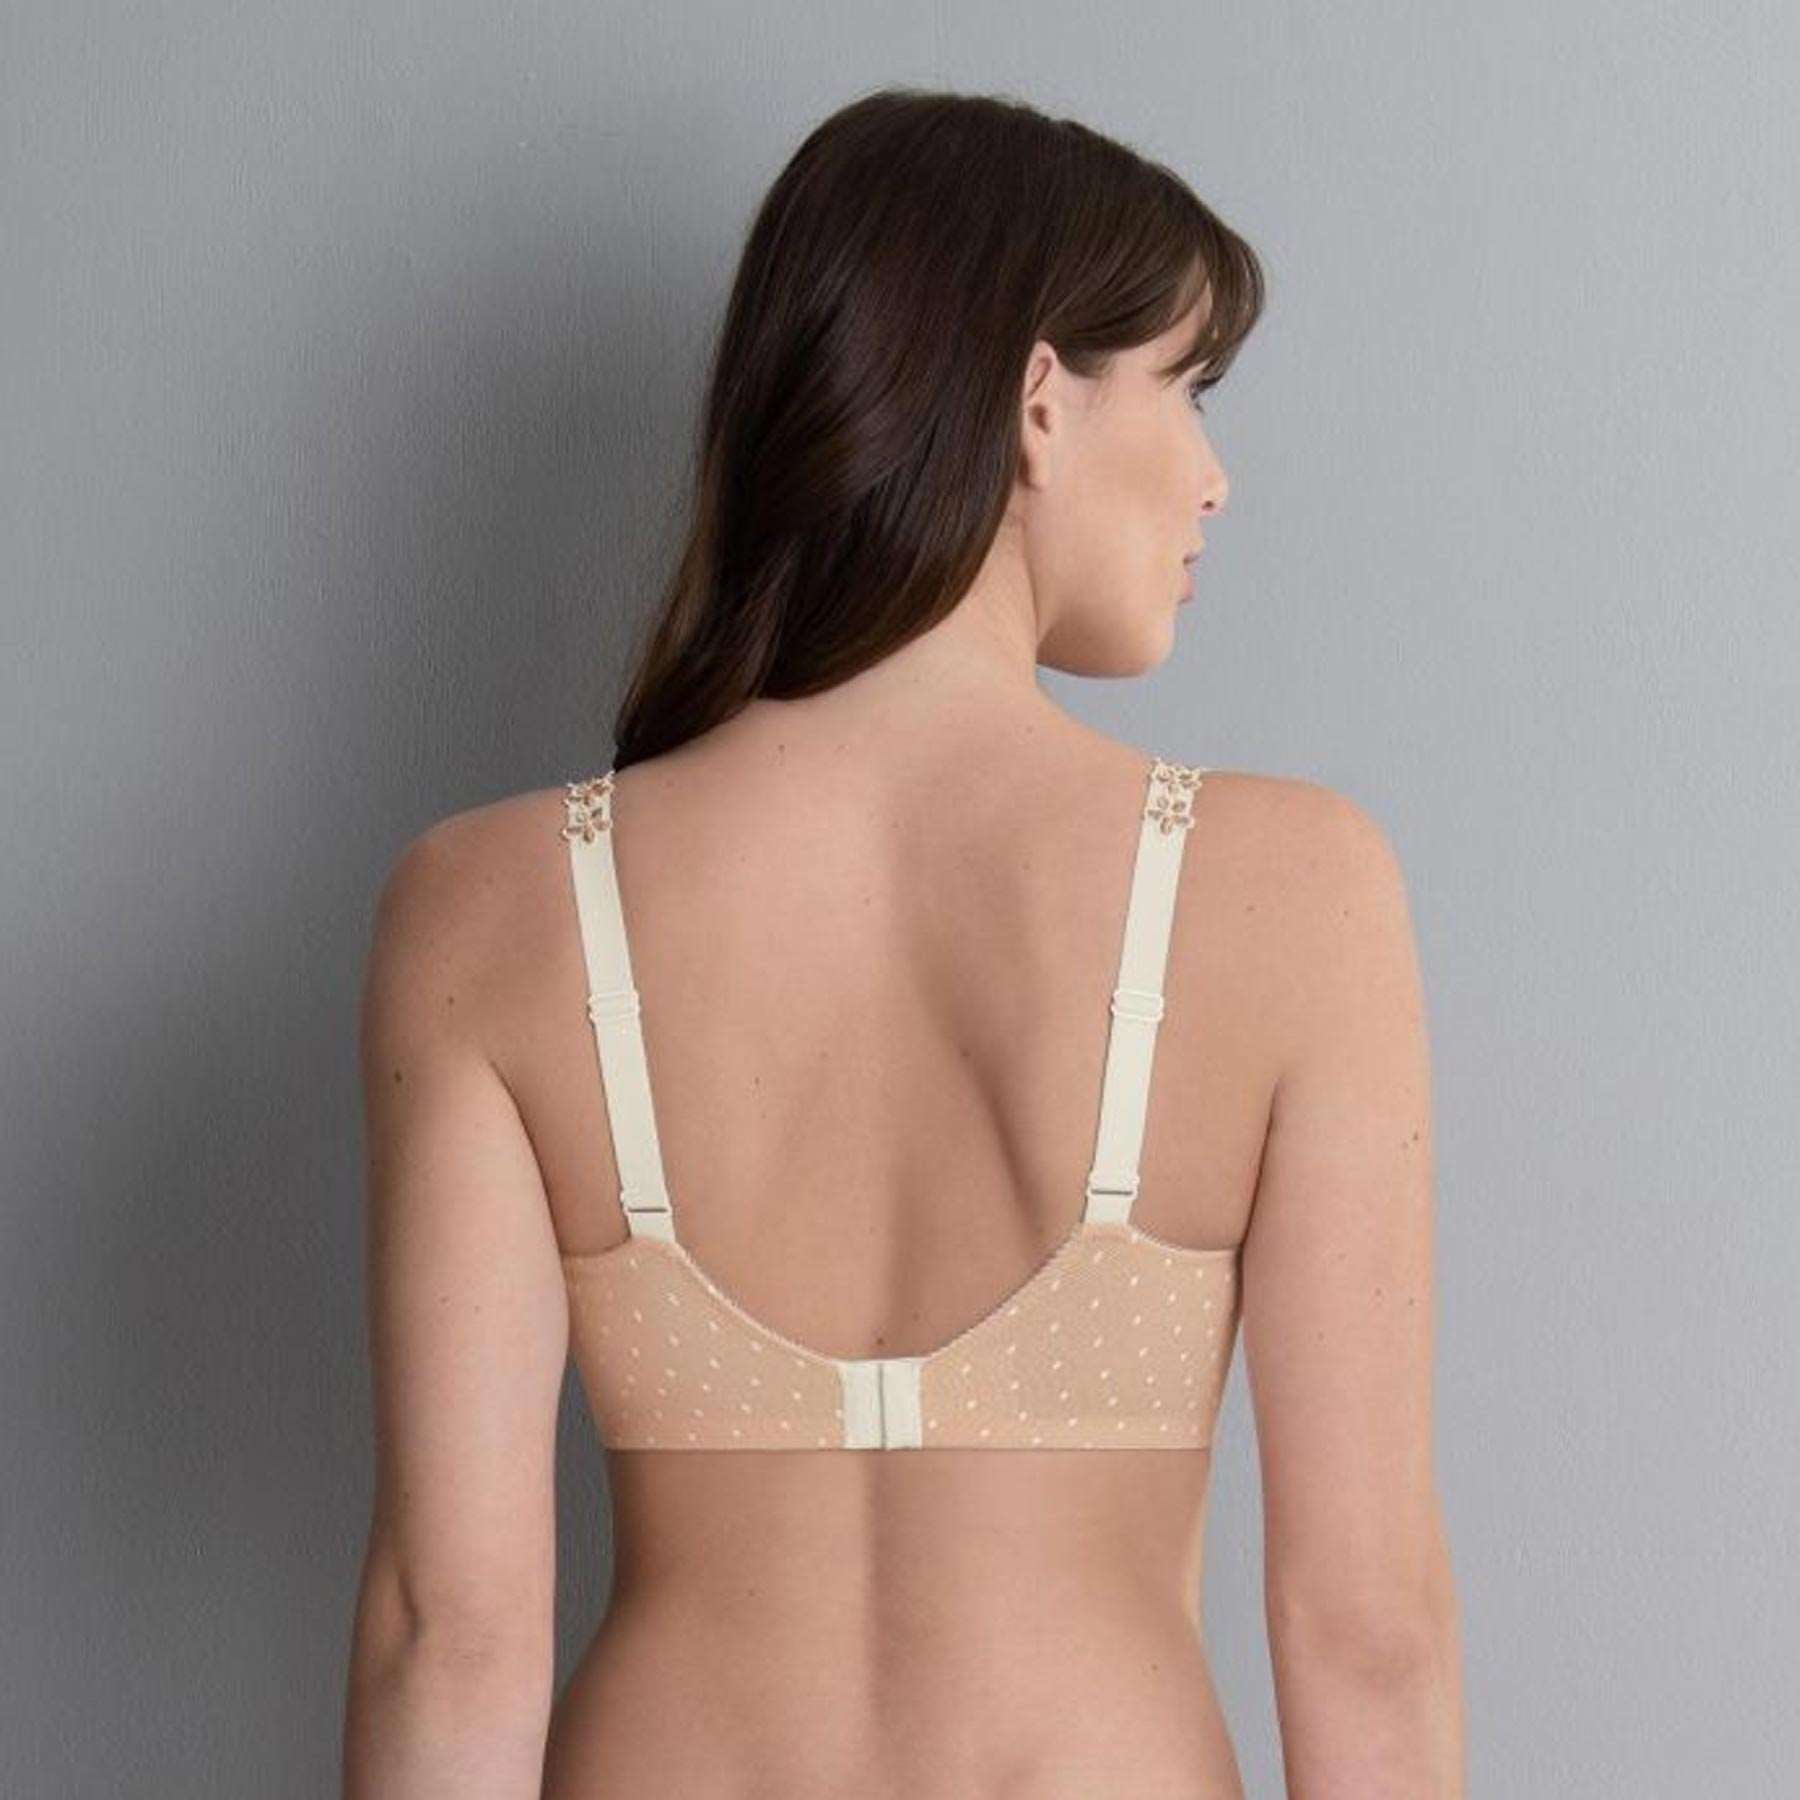 Amazing Collection Of Mastectomy Bras From Anita